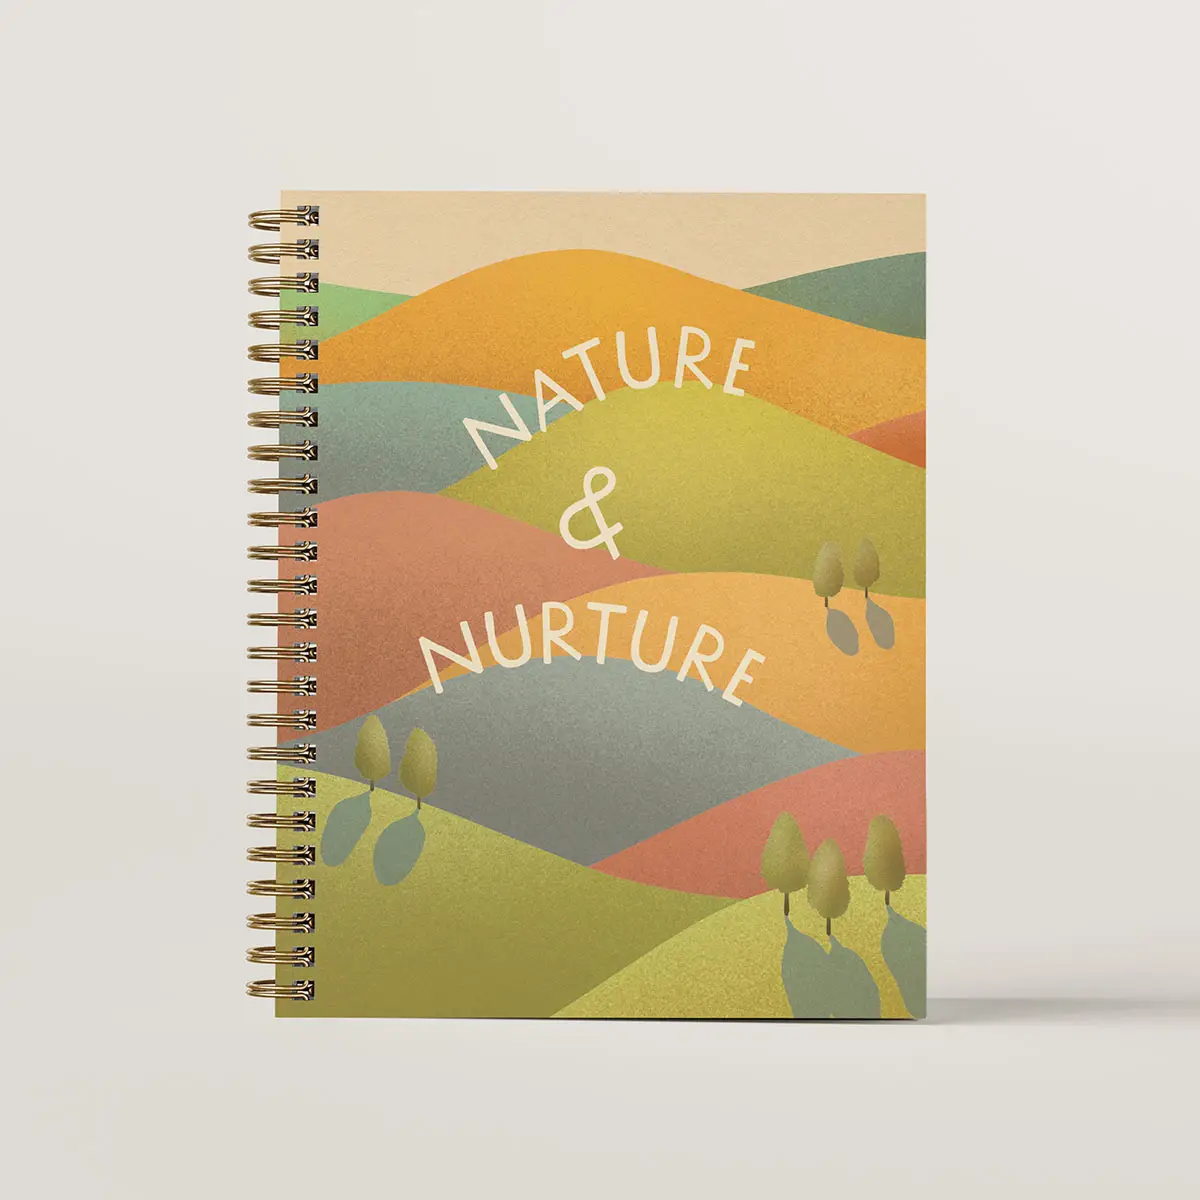 Journal cover design of Nature & Nurture. The cover is illustrated with rolling hills in greens and warm tones and with small trees on the hills with long cast shadows.